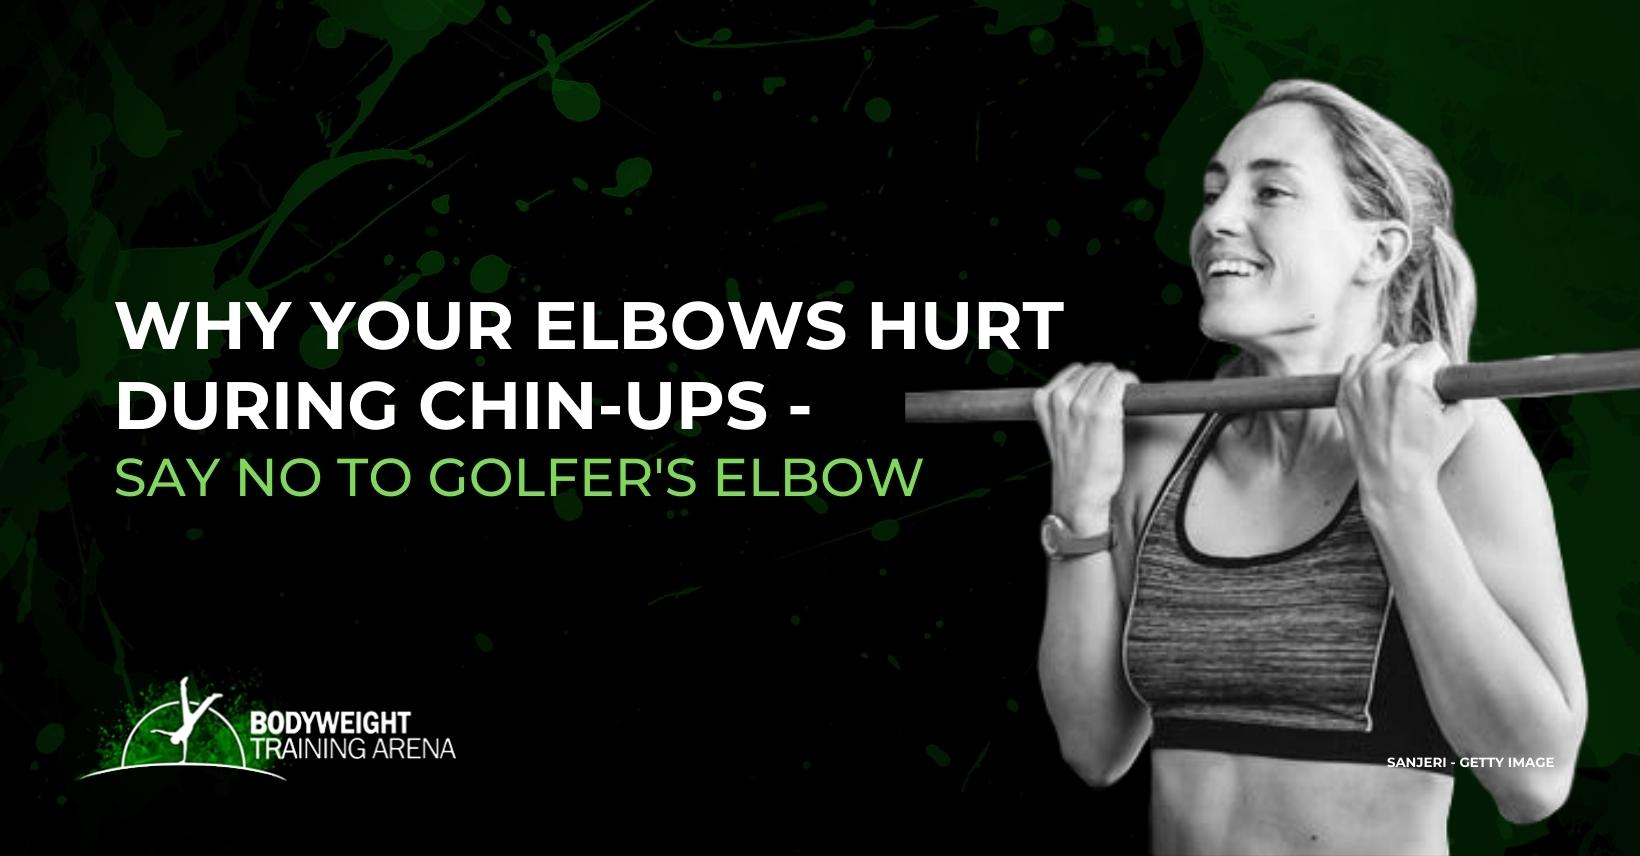 Why your elbows hurt during chin-ups – Say NO to golfer’s elbow